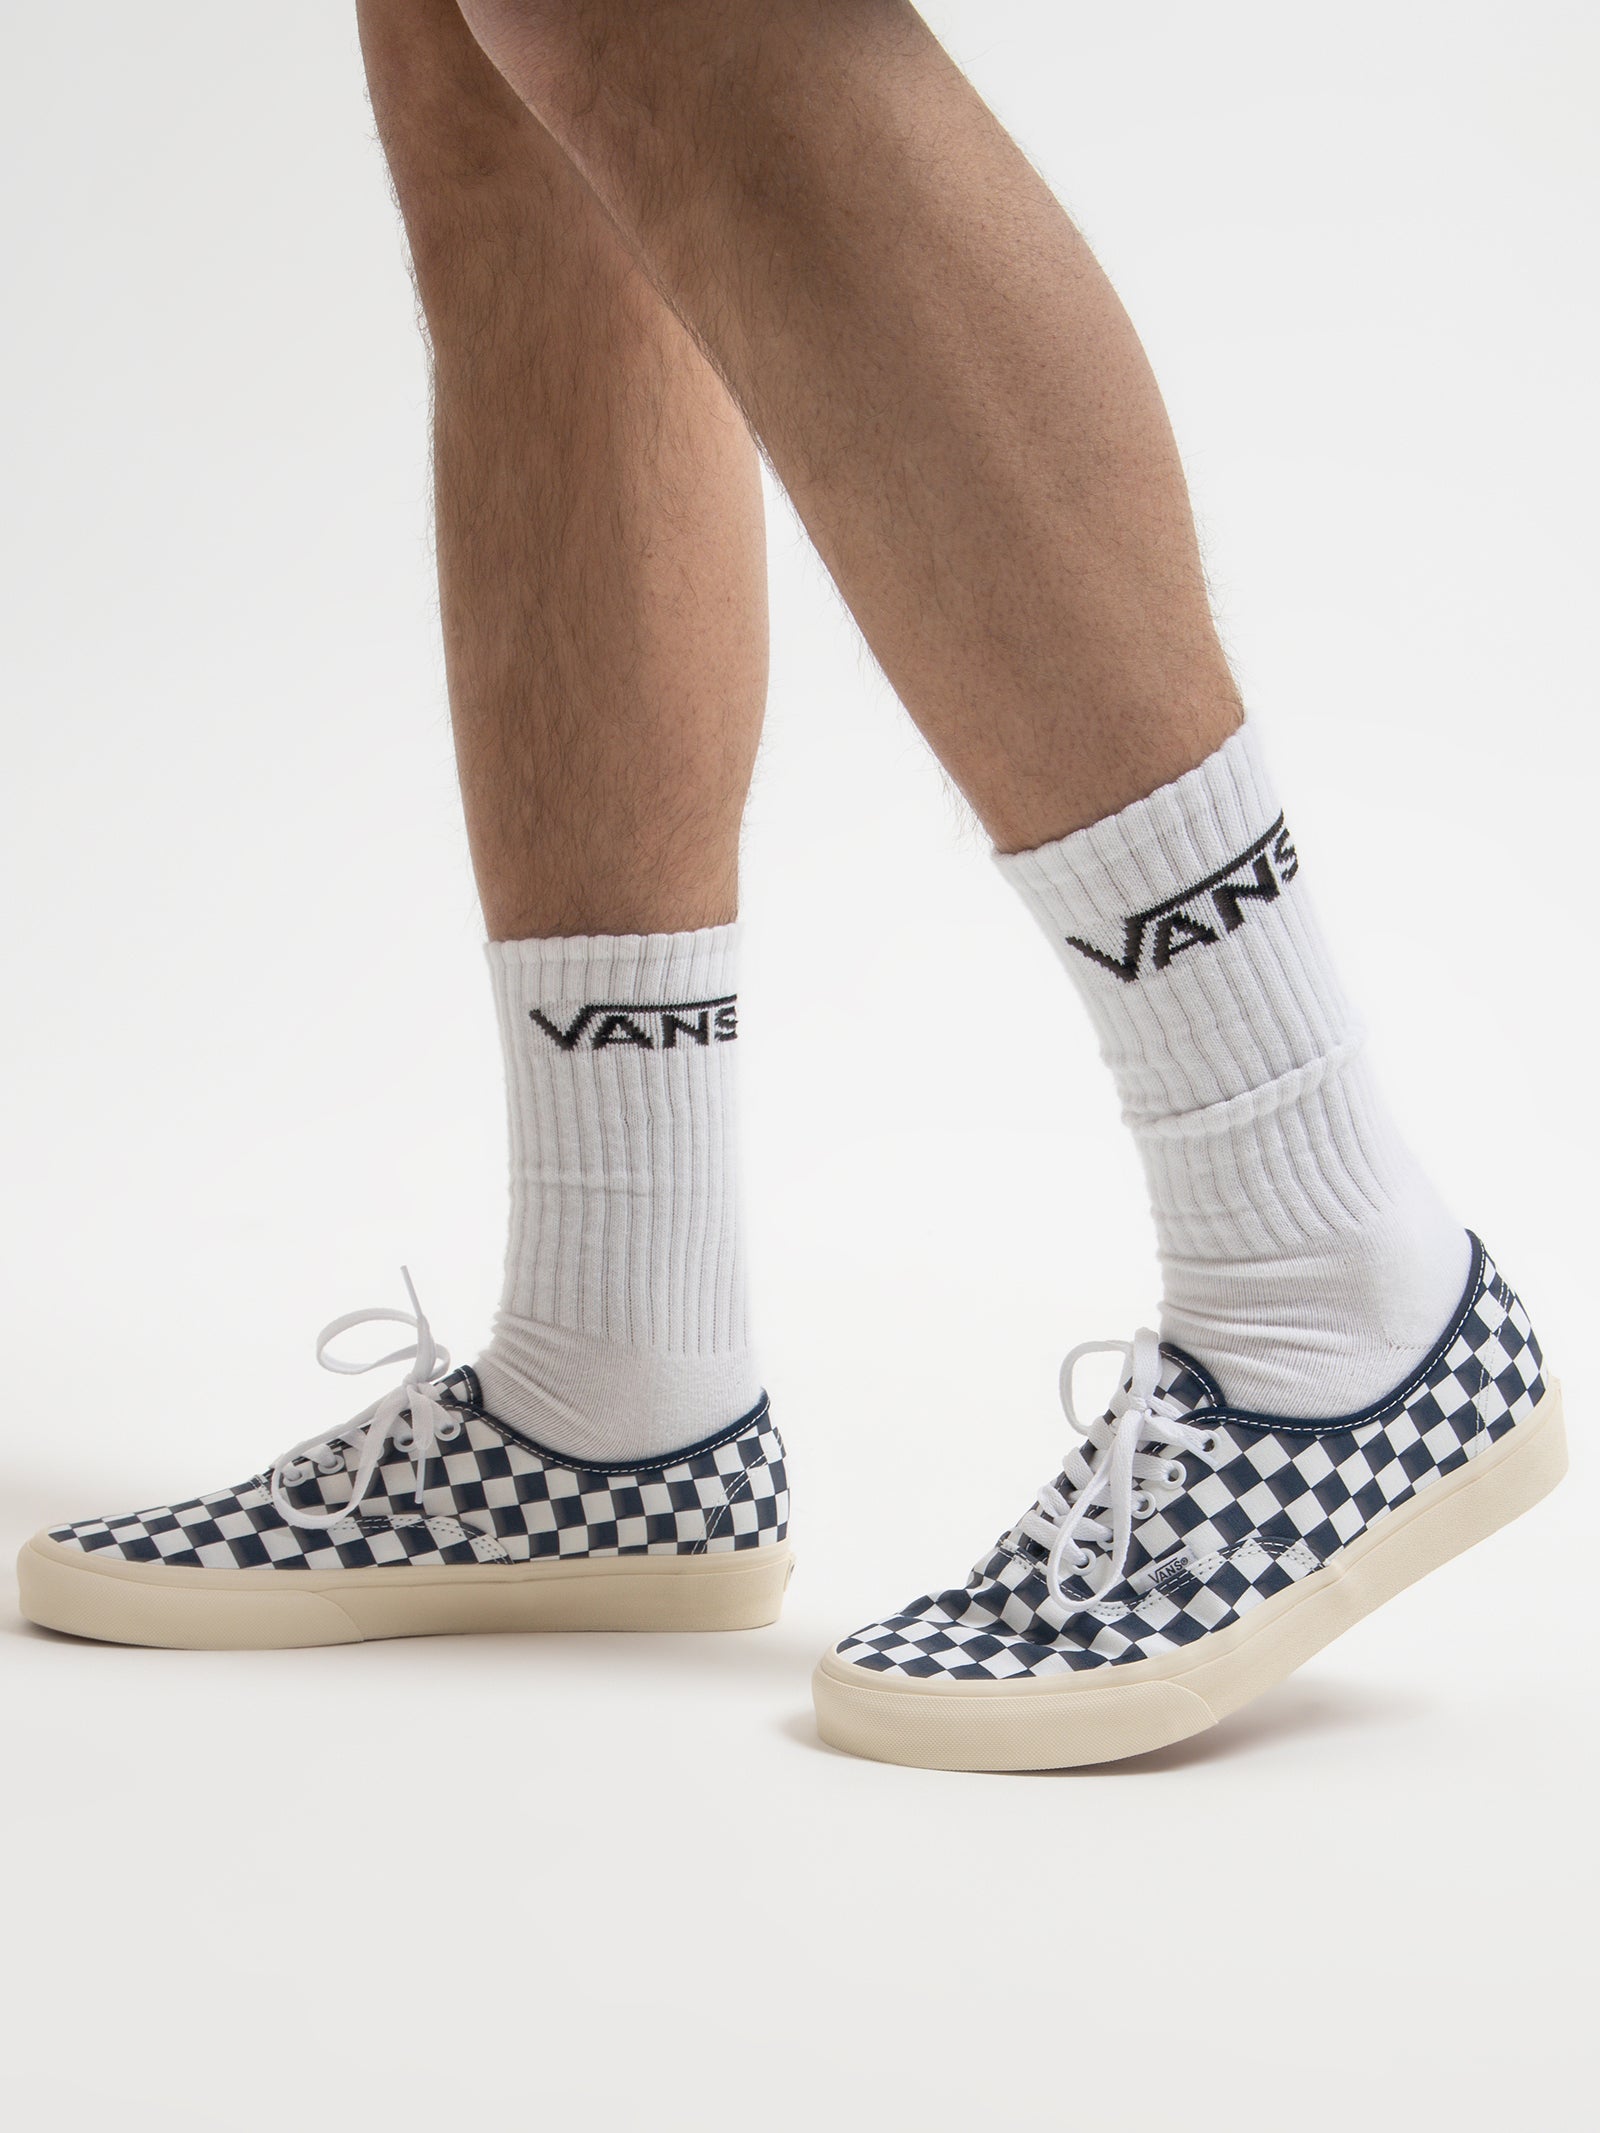 Unisex Authentic Checkerboard Sneakers in Dress Blues & White